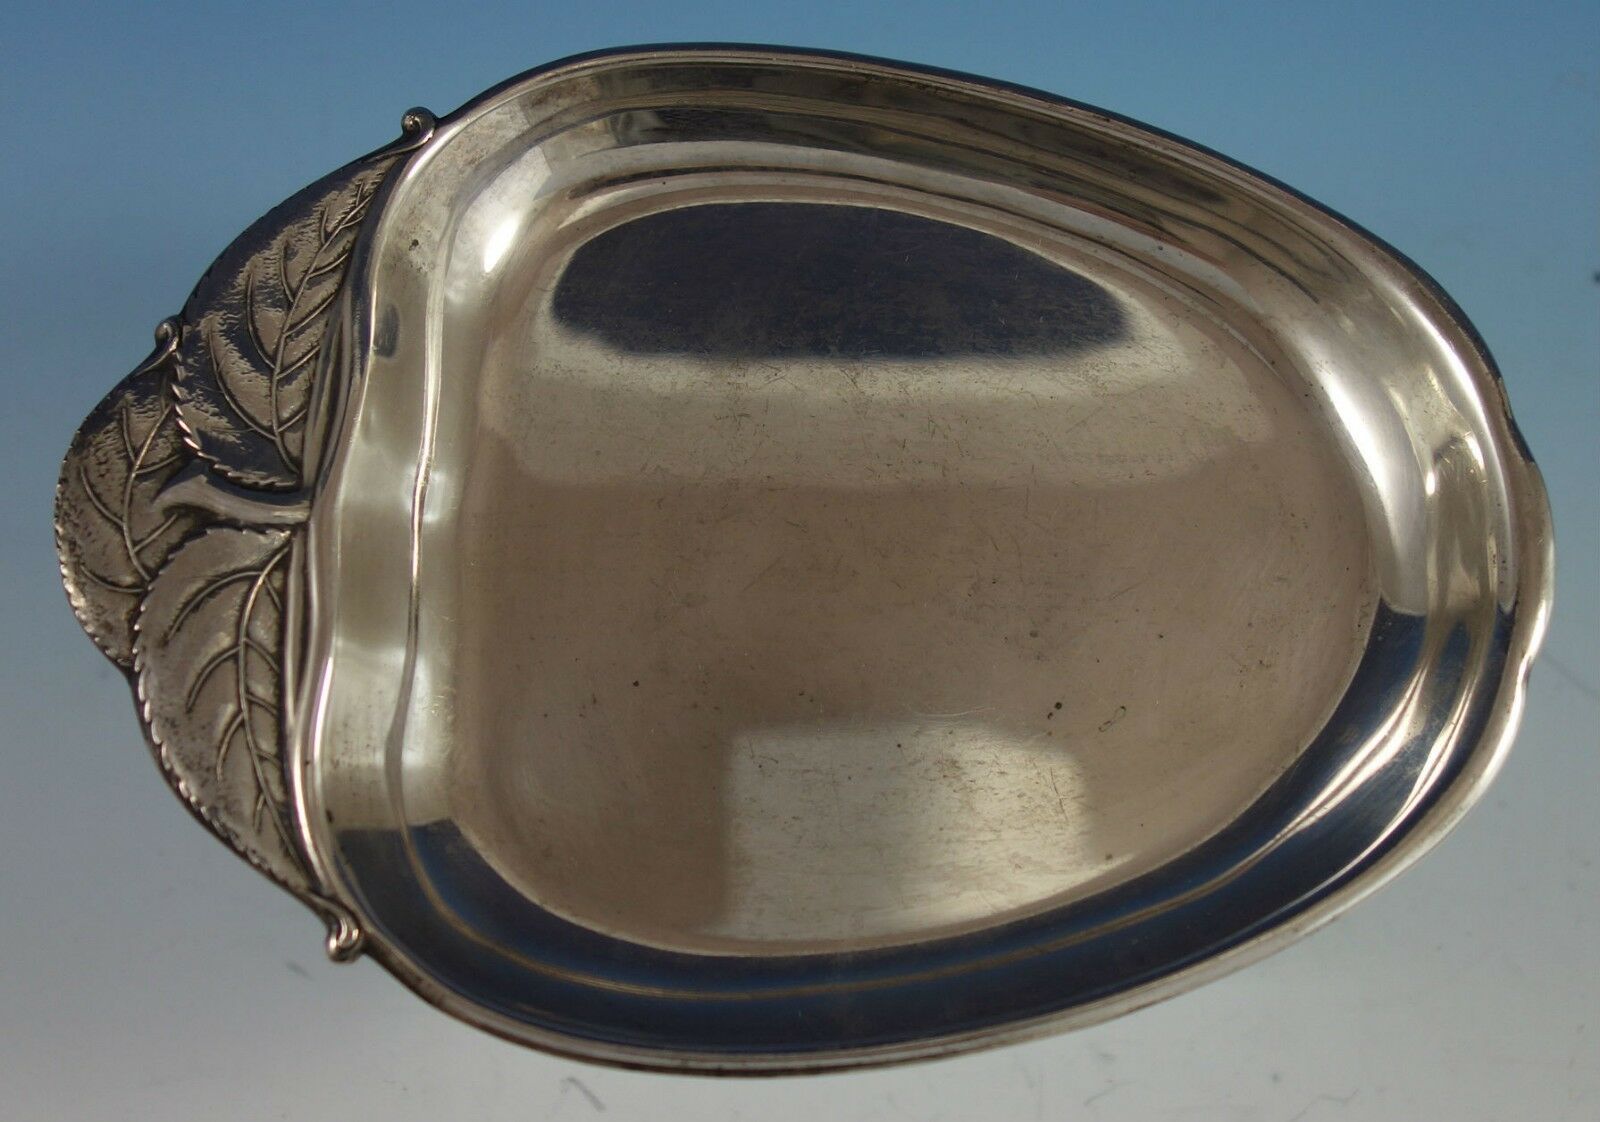 Primary image for Wallace Sterling Silver Bowl Apple Shaped with Stem and Leaves #4453 (#2790)